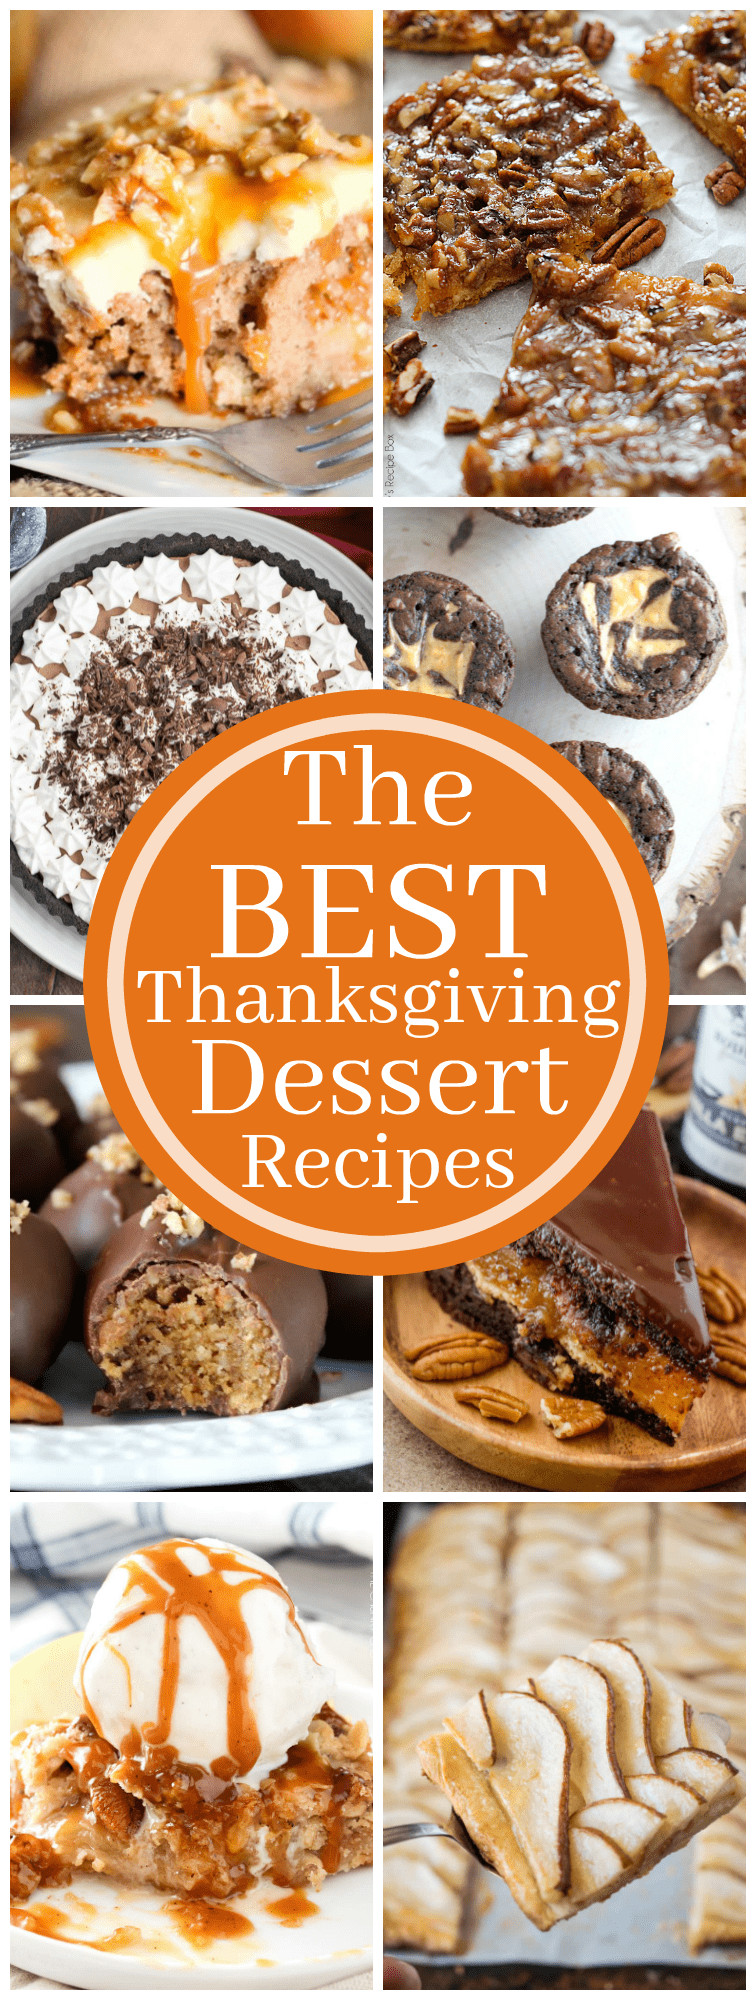 Yummy Thanksgiving Desserts
 15 of the Best Thanksgiving Desserts Yummy Healthy Easy